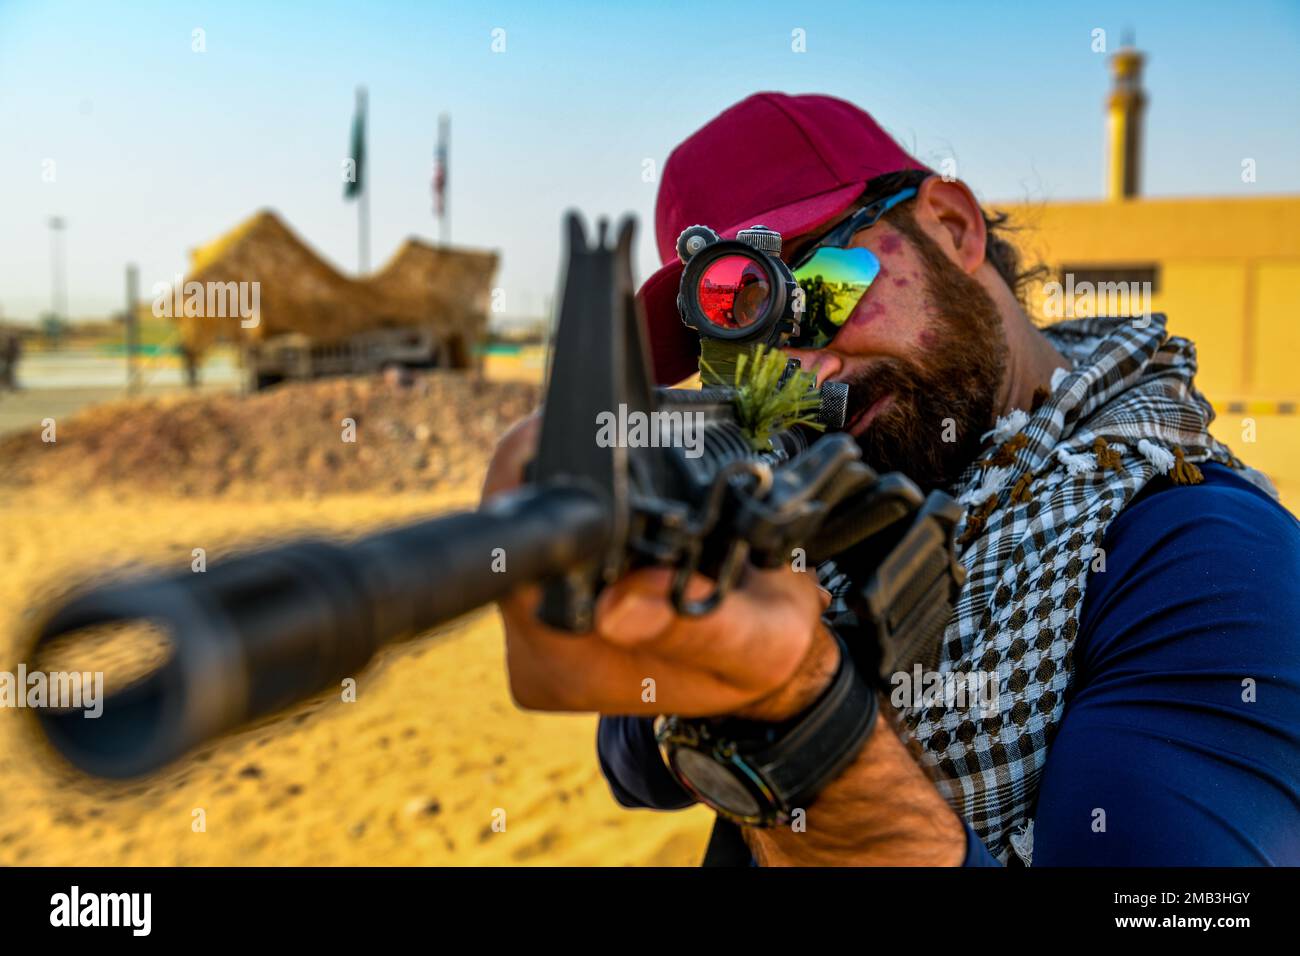 A U.S. Army translator looks down the barrel of an M4 carbine during a platoon immersion in Al-Kharj, Kingdom of Saudi Arabia, June 10, 2022. The immersion was a training event meant to build interoperability between the U.S Army and Royal Saudi Land Force at the platoon level while enhancing both U.S. and partner nation skillsets. Stock Photo